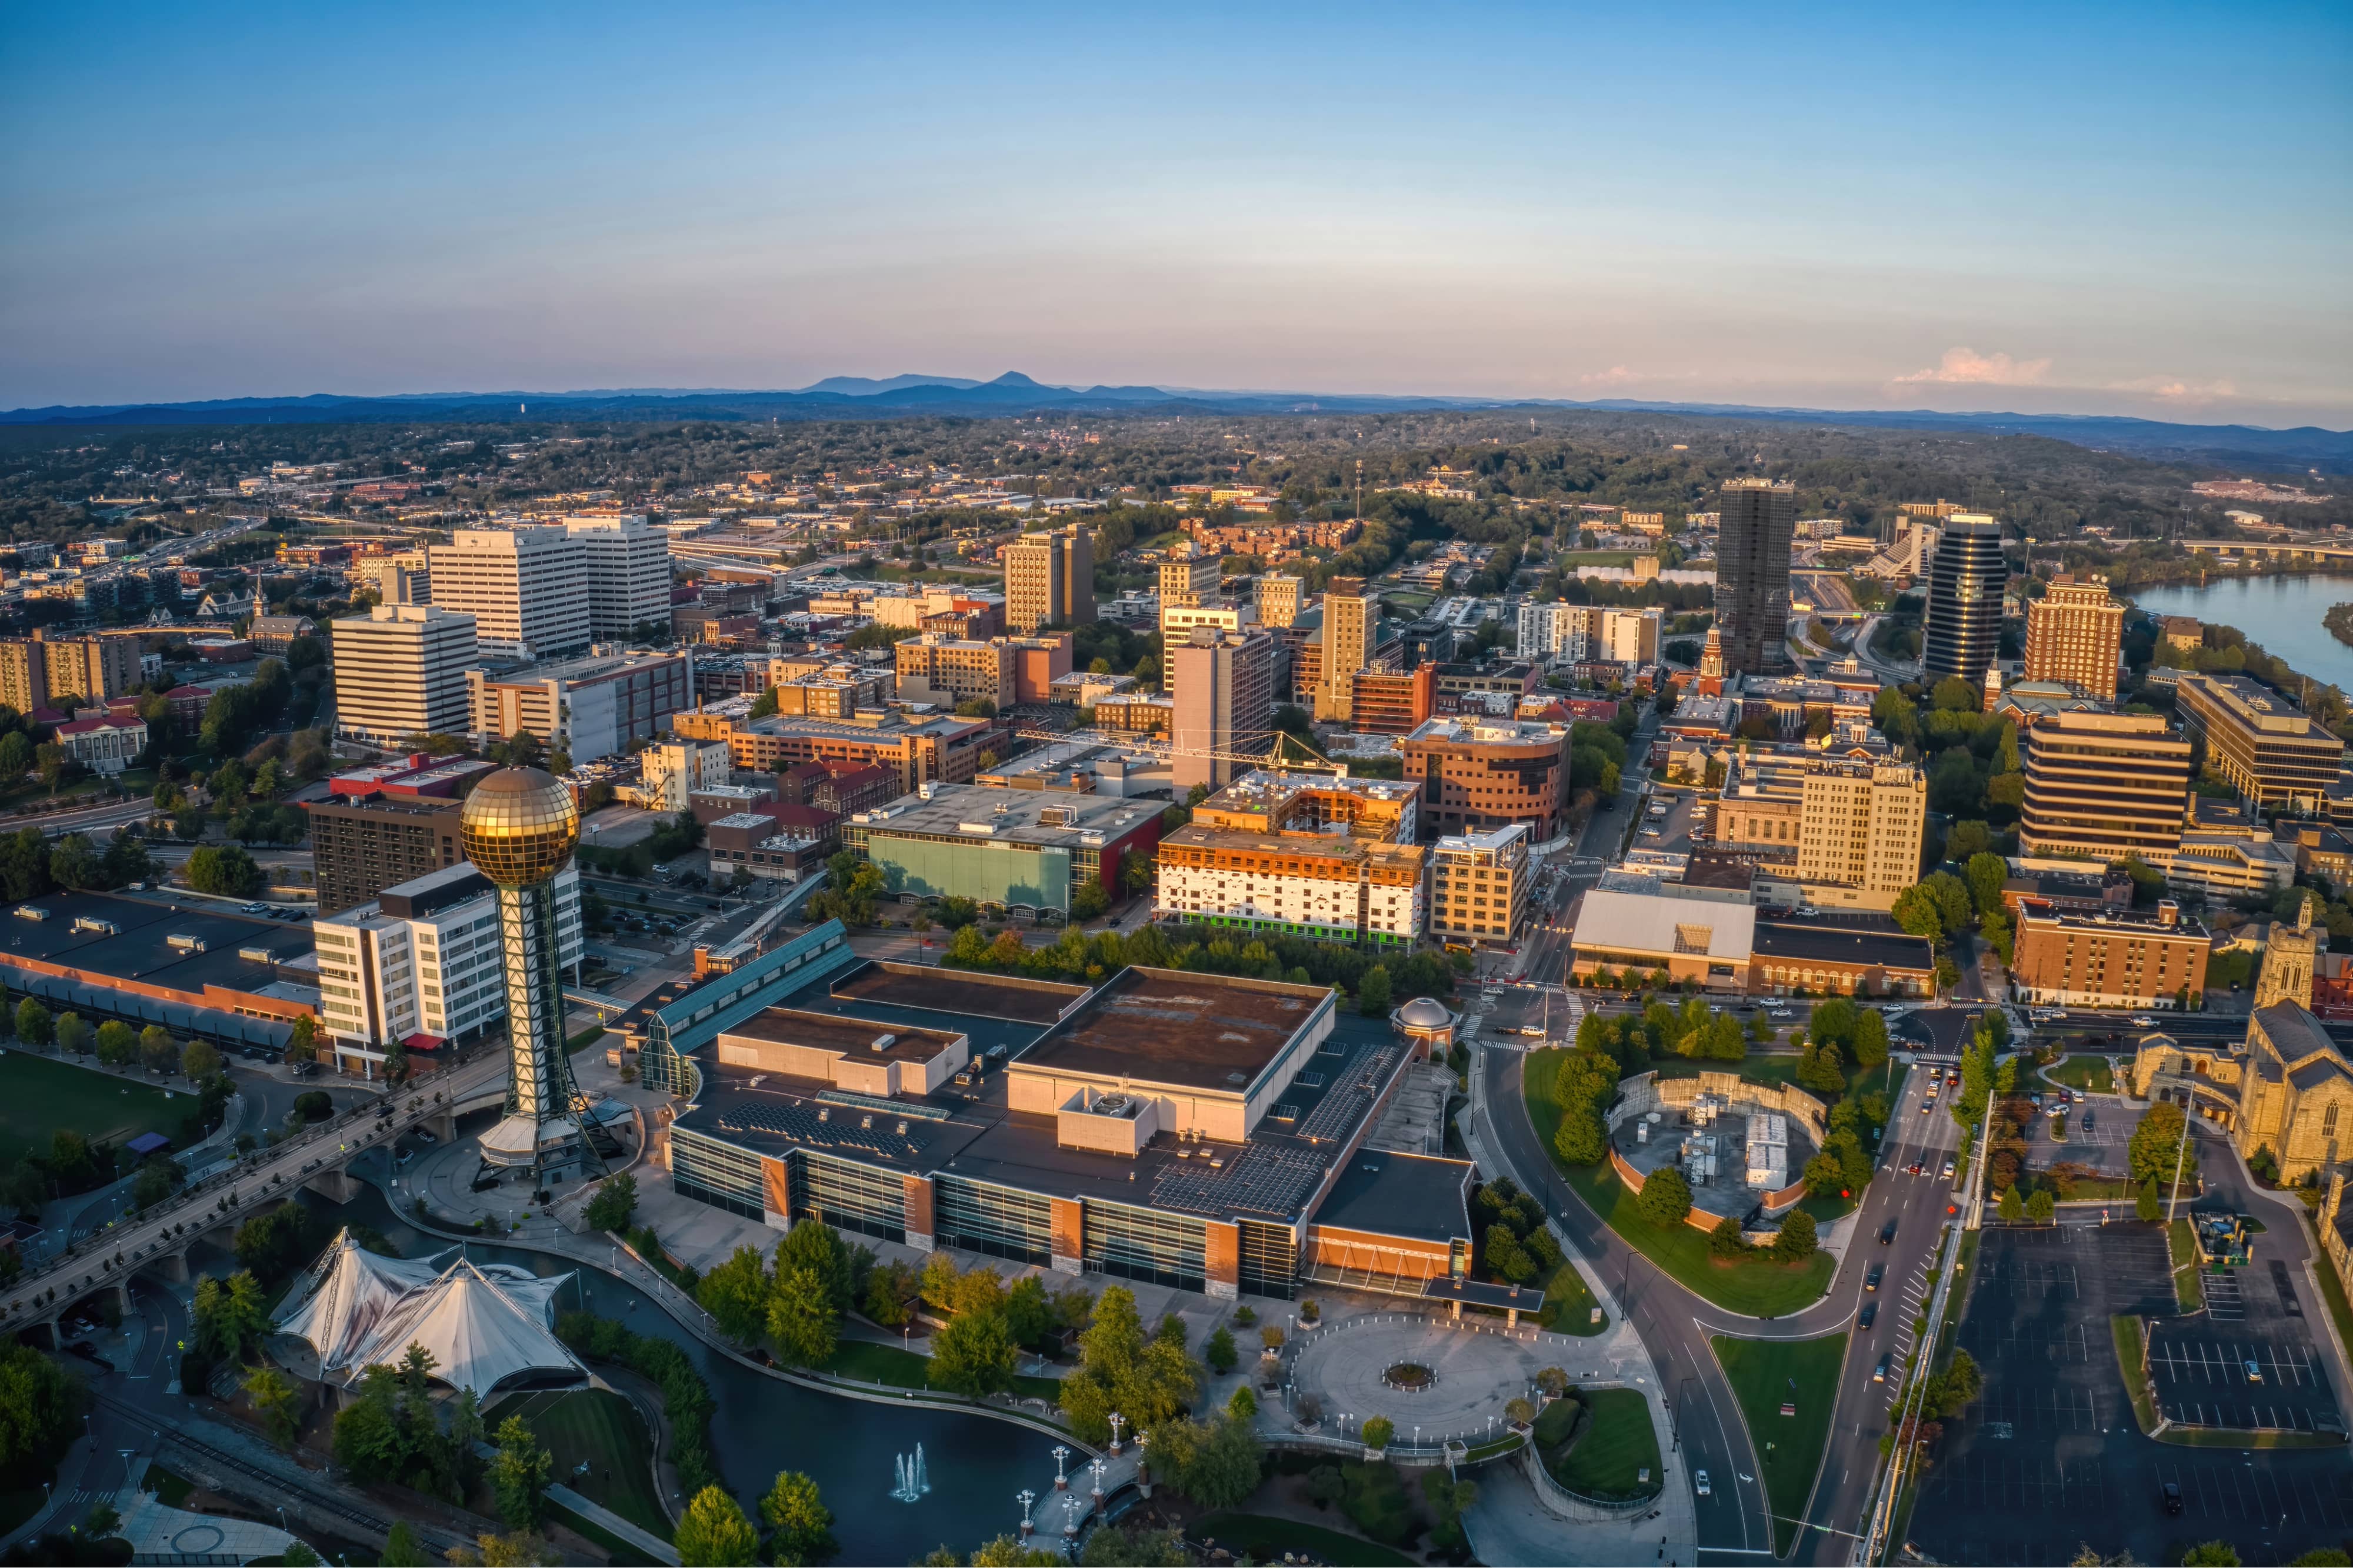 Aerial View of Knoxville, Tennessee during Dusk